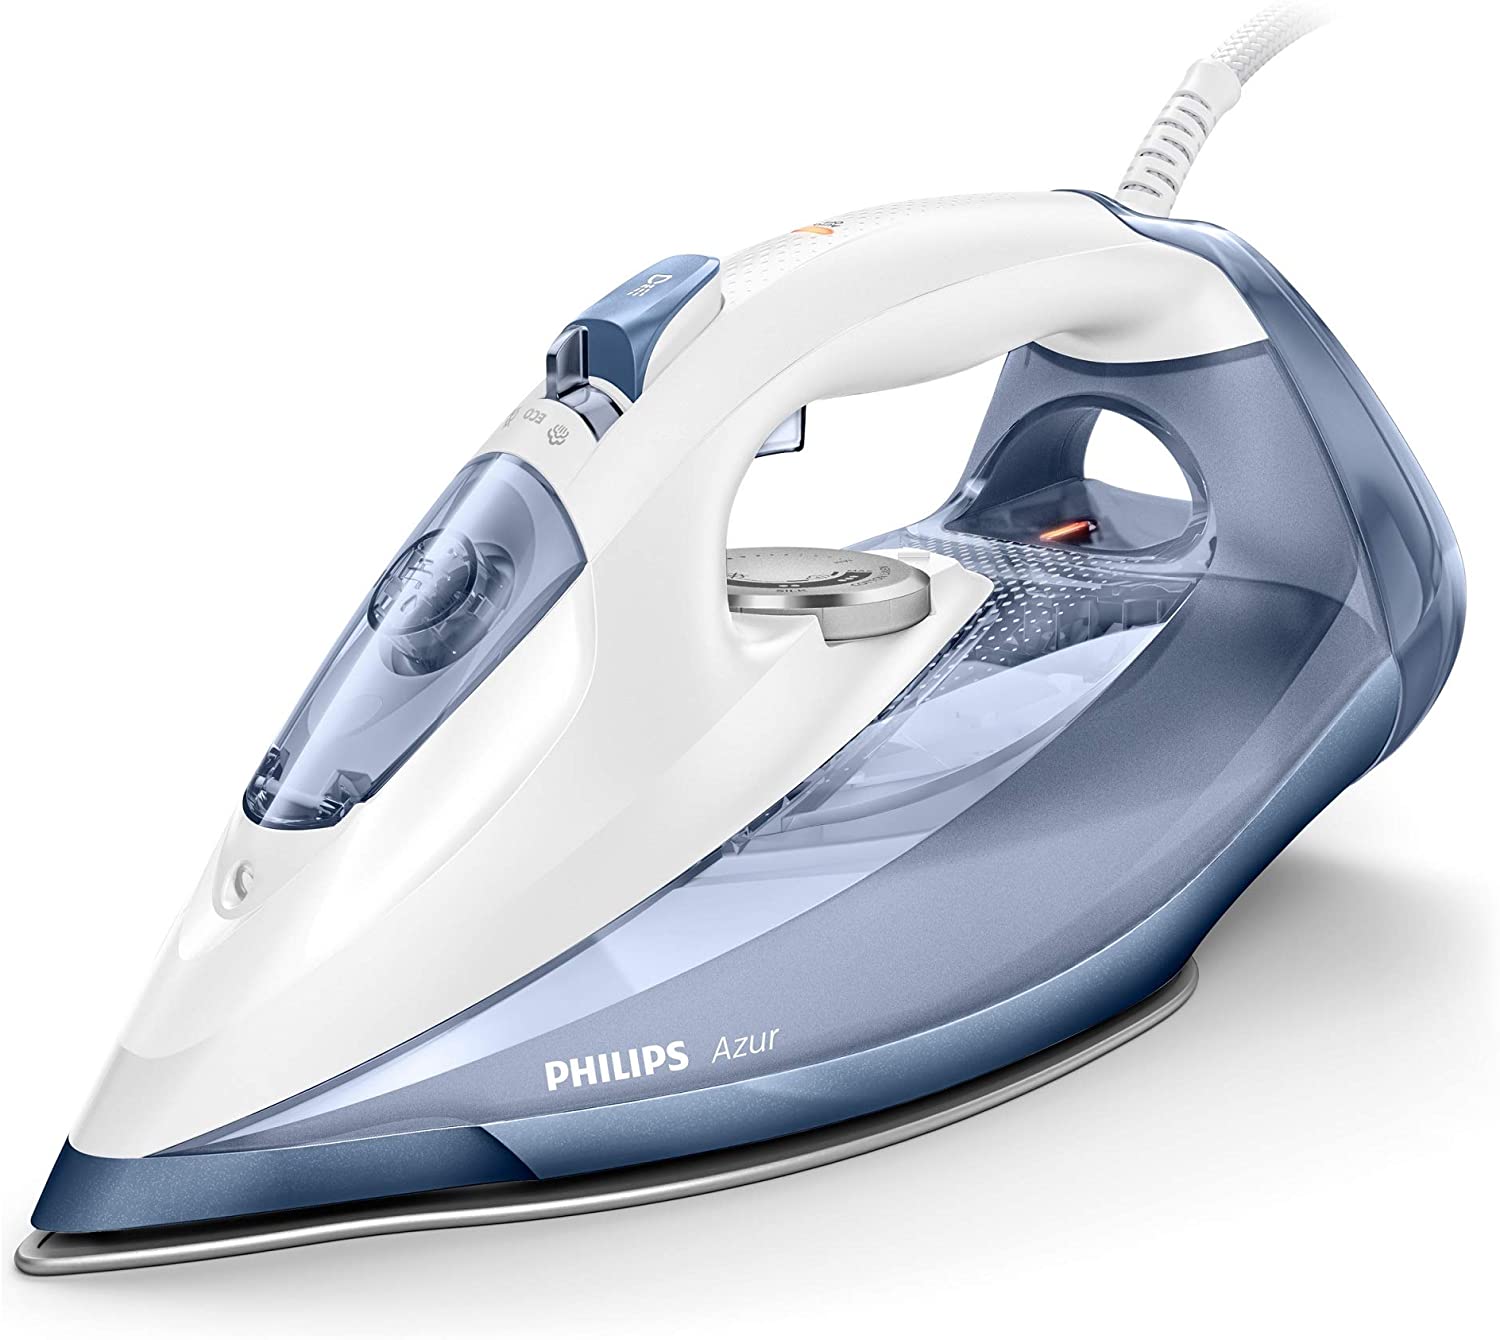 Philips Steam Iron 2800 Watt Turquoise - GC4902 | reliable performance | lightweight | variable steam settings | safety features | stylish | even heat distribution | Halabh.com